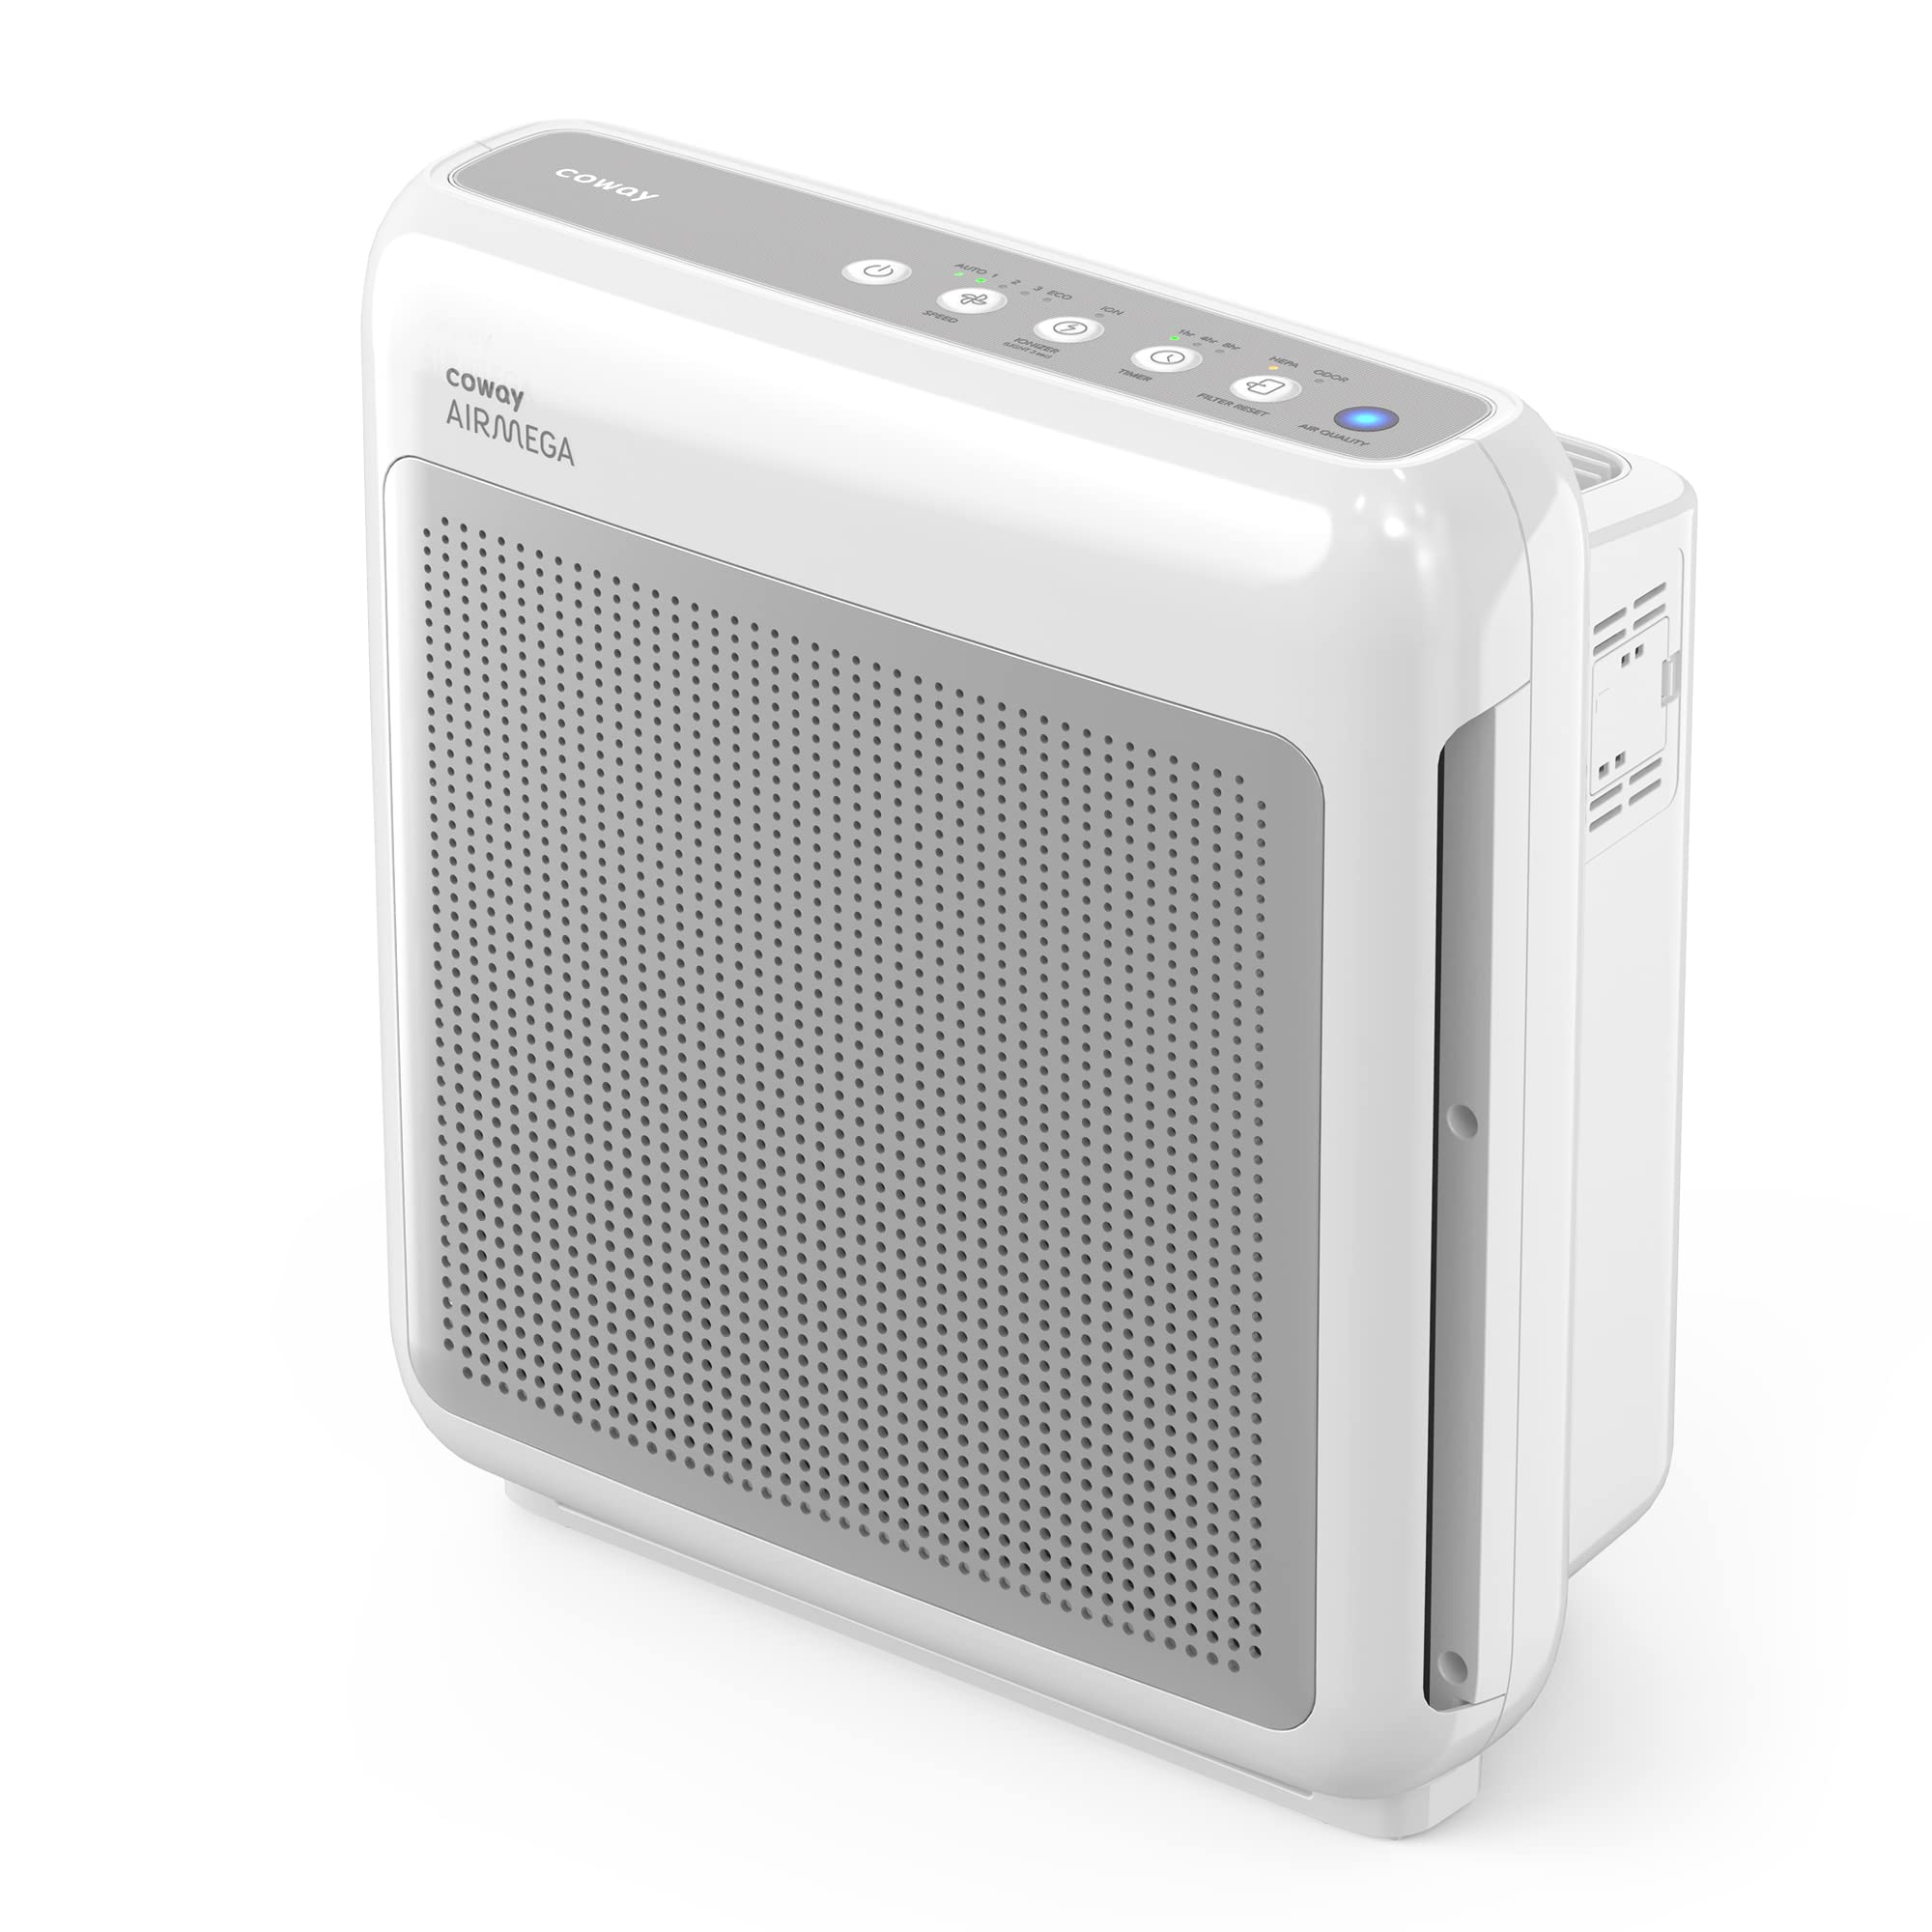 Coway Airmega AP-1512HH(W) True HEPA Purifier with Air Quality Monitoring, Auto, Timer, Filter Indicator, and Eco Mode, 16.8 x 18.3 x 9.7, White $151.47